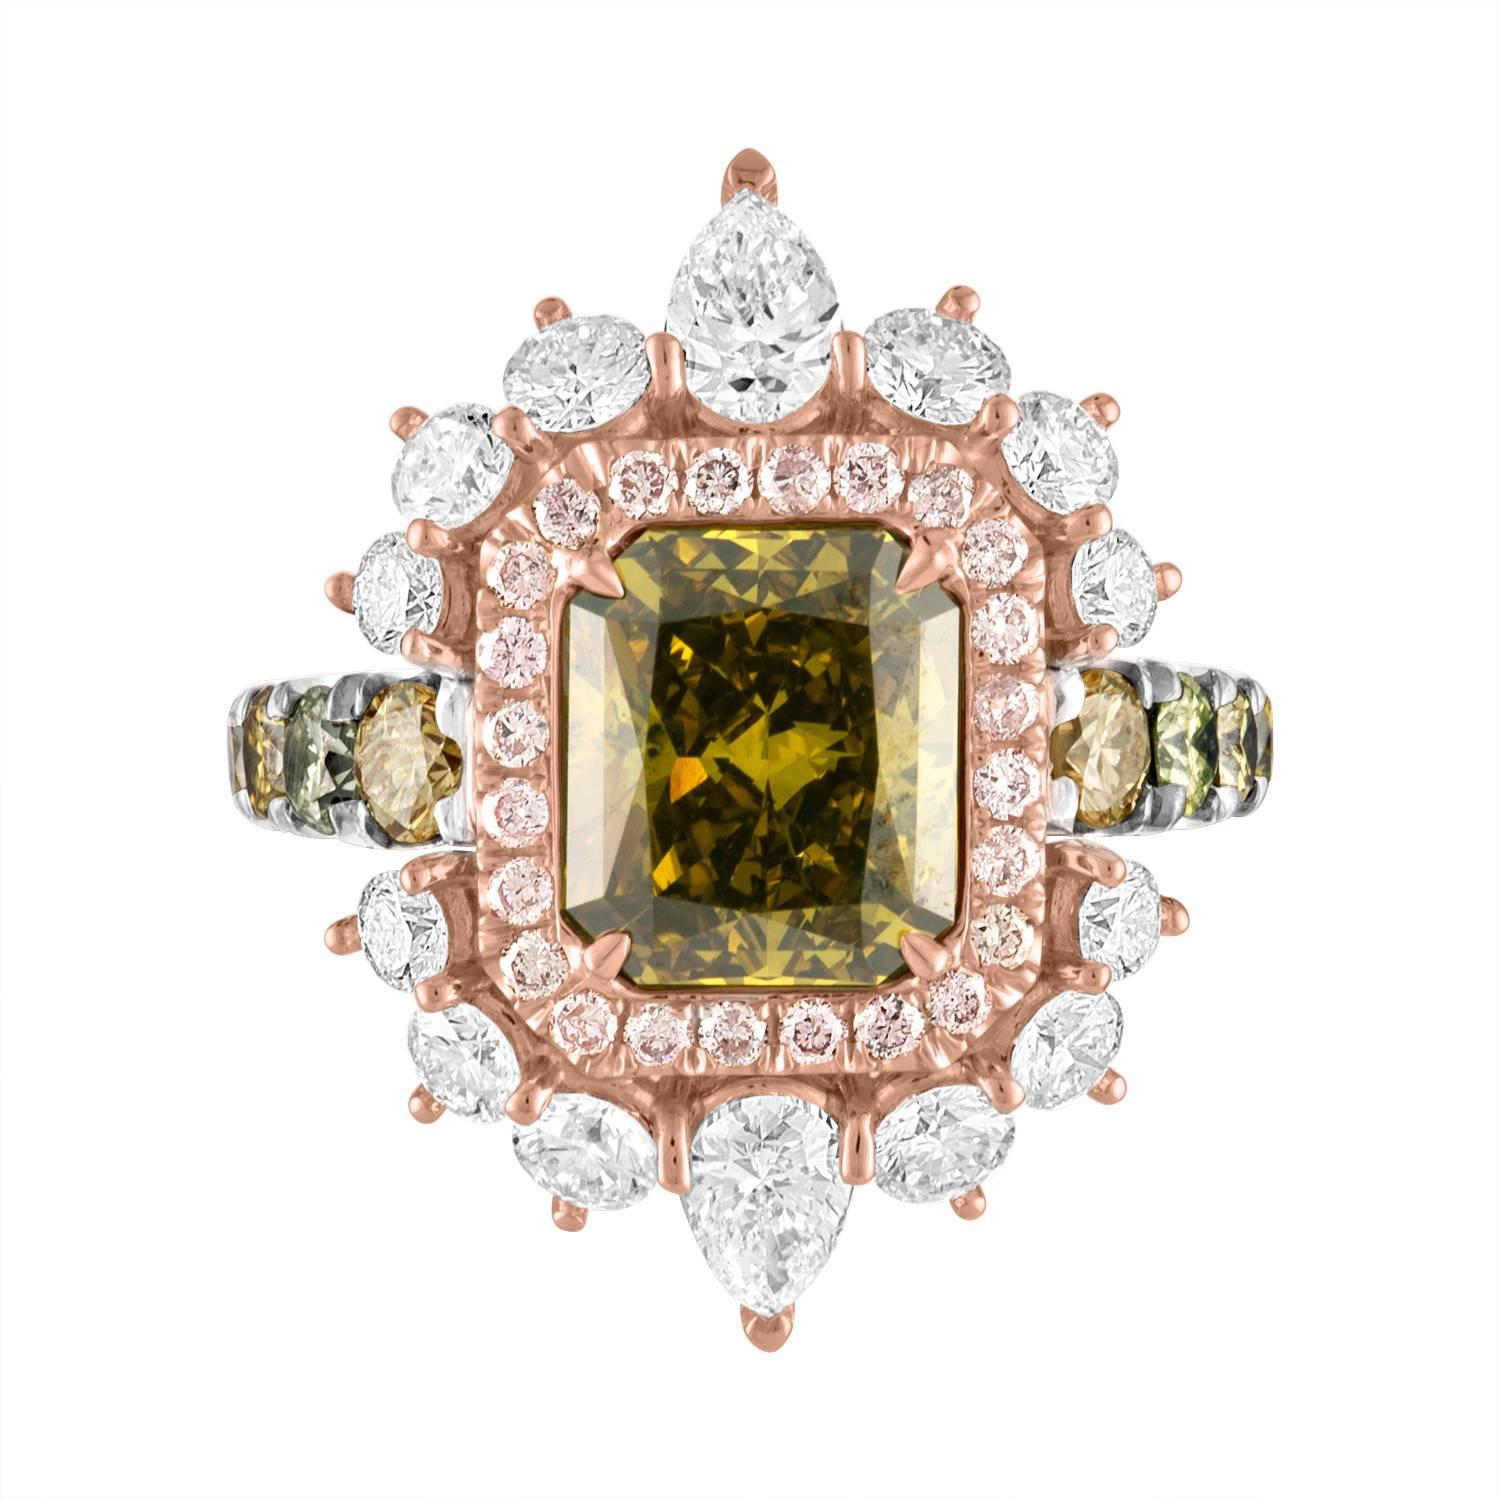 3.02 Carat Radiant Diamond is set in the Center of a Hand Crafted Ring. Surrounding the Center is a Row of 0.28 Carats of Pink Diamonds that is set in 18K Rose Gold. That Pink Diamond Row is surrounded by Row of White Diamonds that contains: 
2 Pear